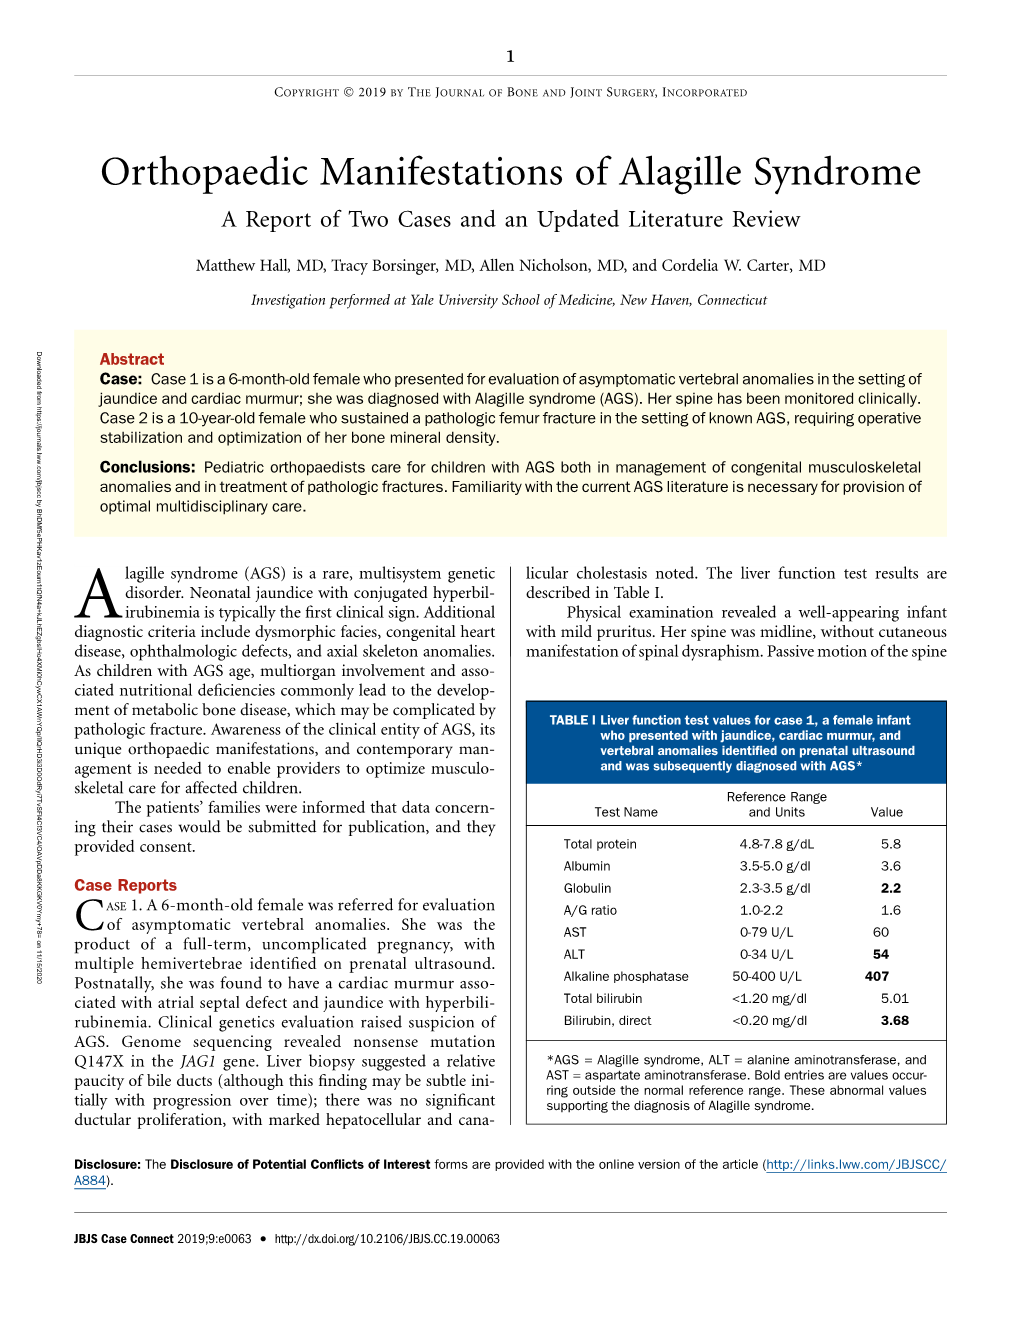 Orthopaedic Manifestations of Alagille Syndrome Jaundice and Cardiac Murmur; Shecase Was 2 Diagnosed Is with a Alagille 10-Year-Old Syndrome Femalestabilization (AGS)